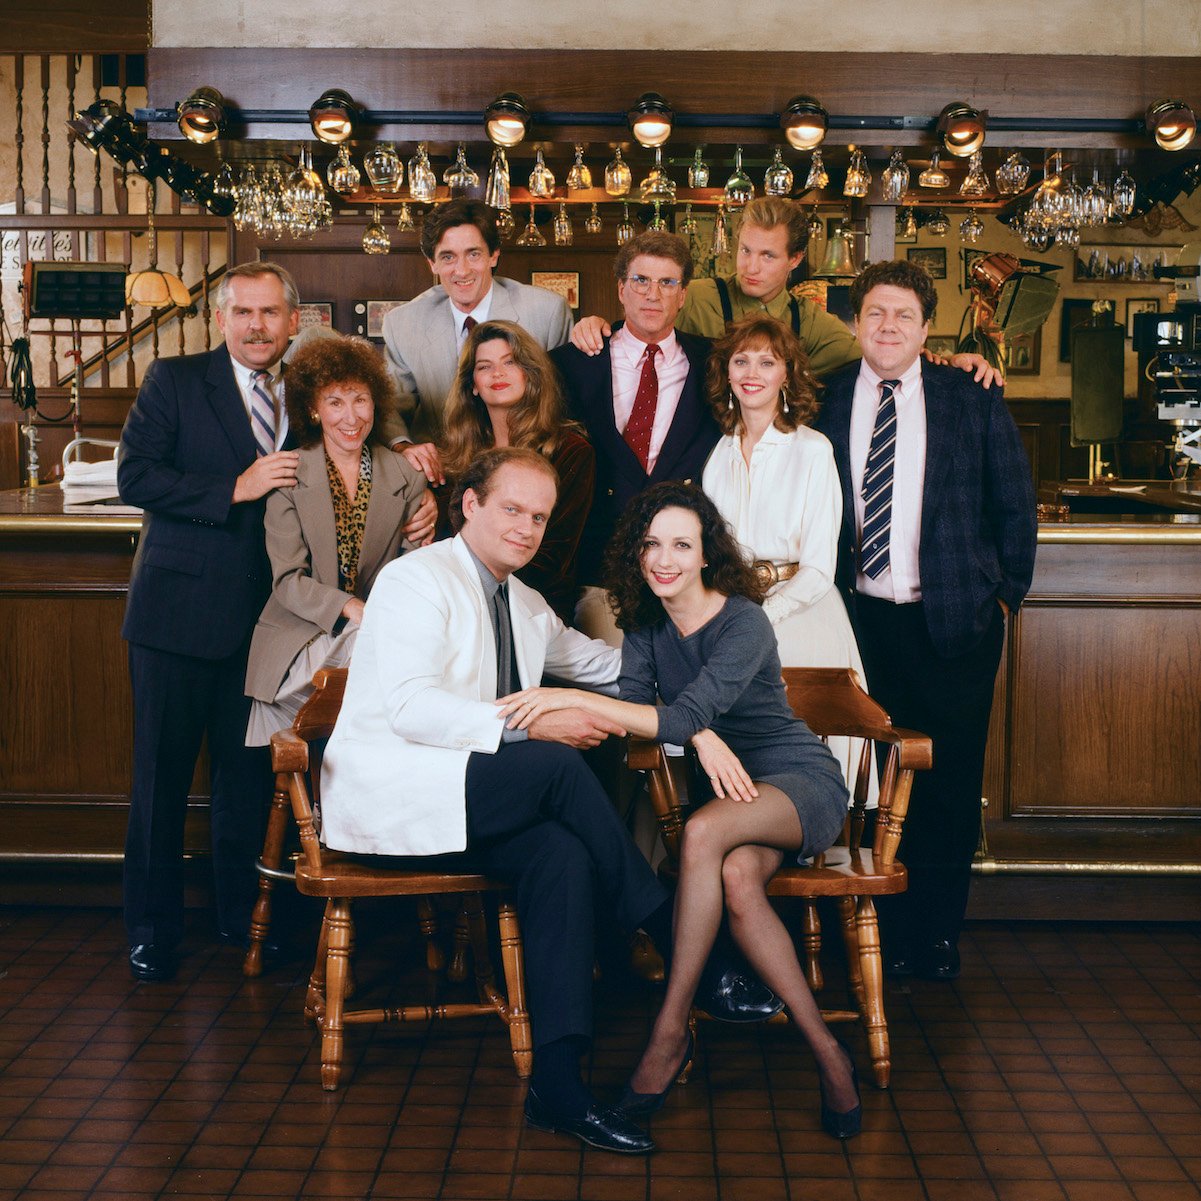 The 'Cheers' cast